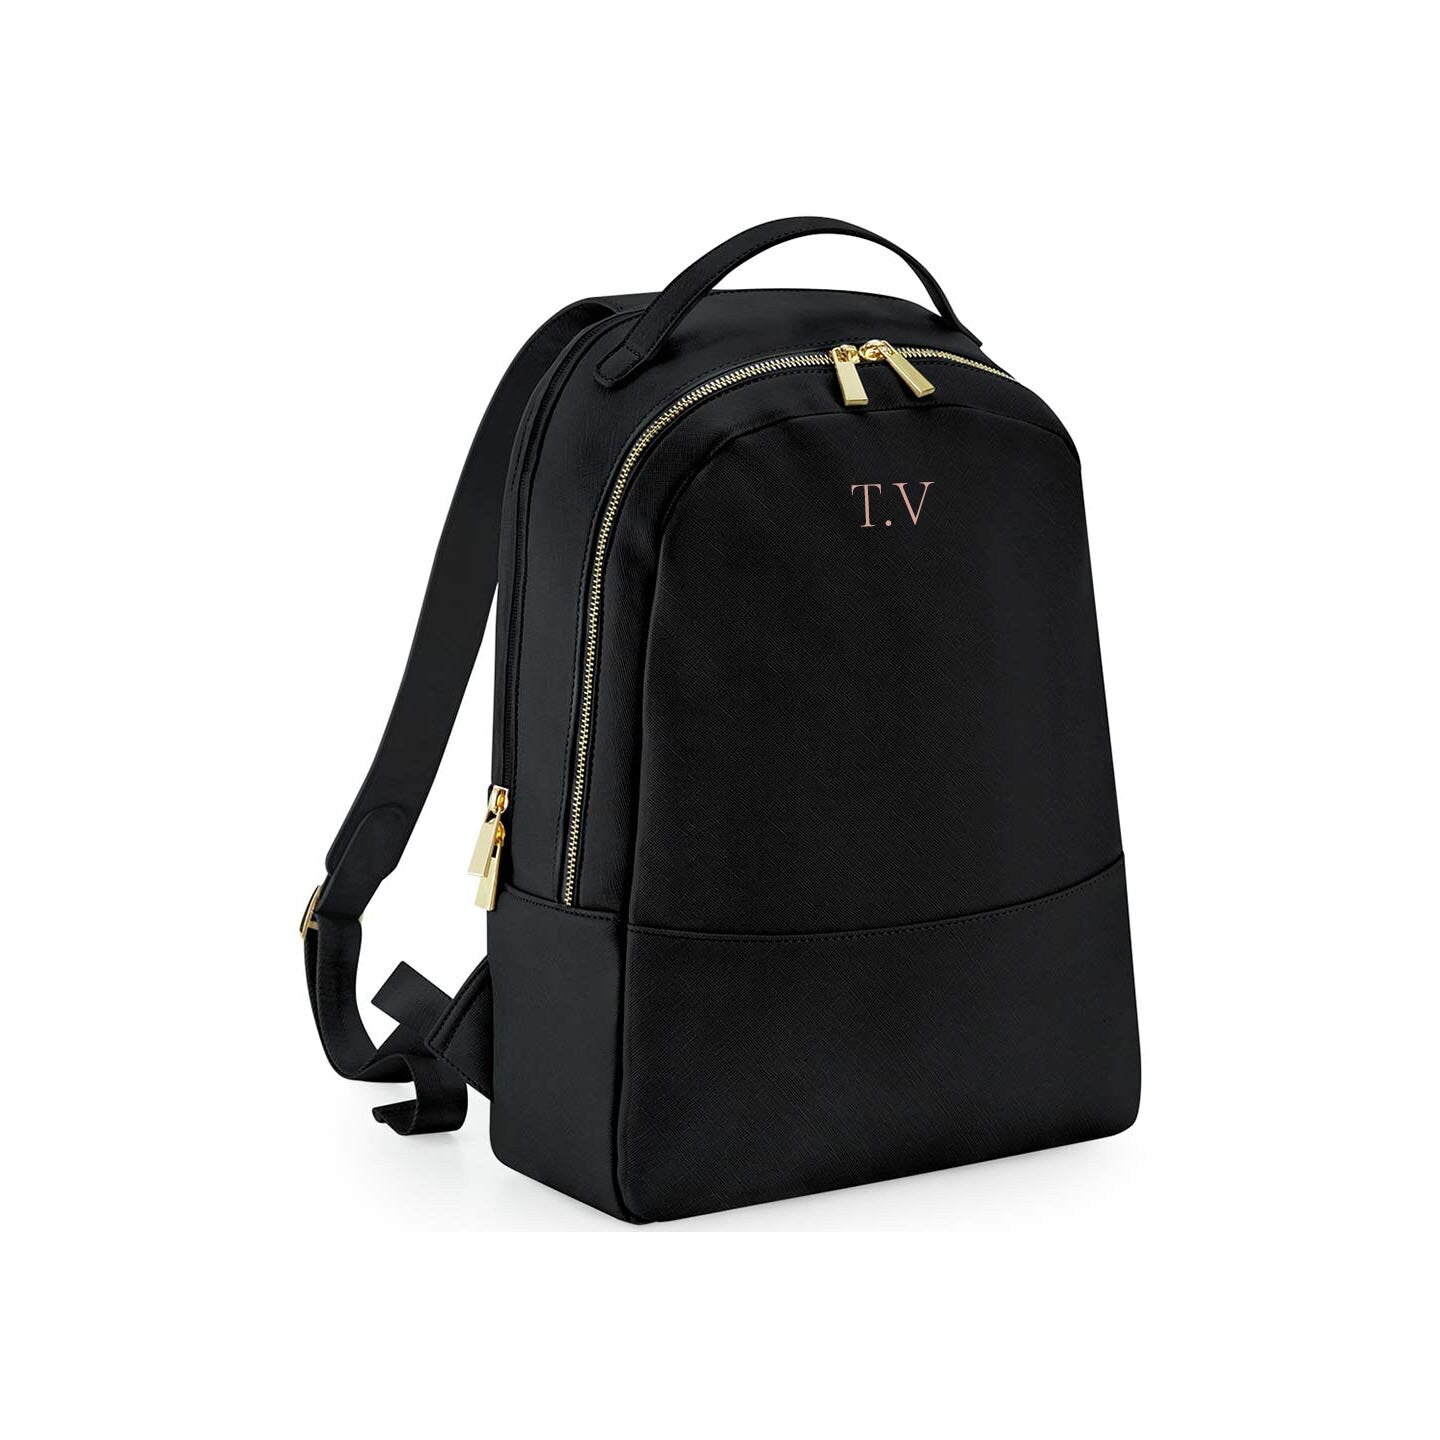 Personalised backpack with Initials